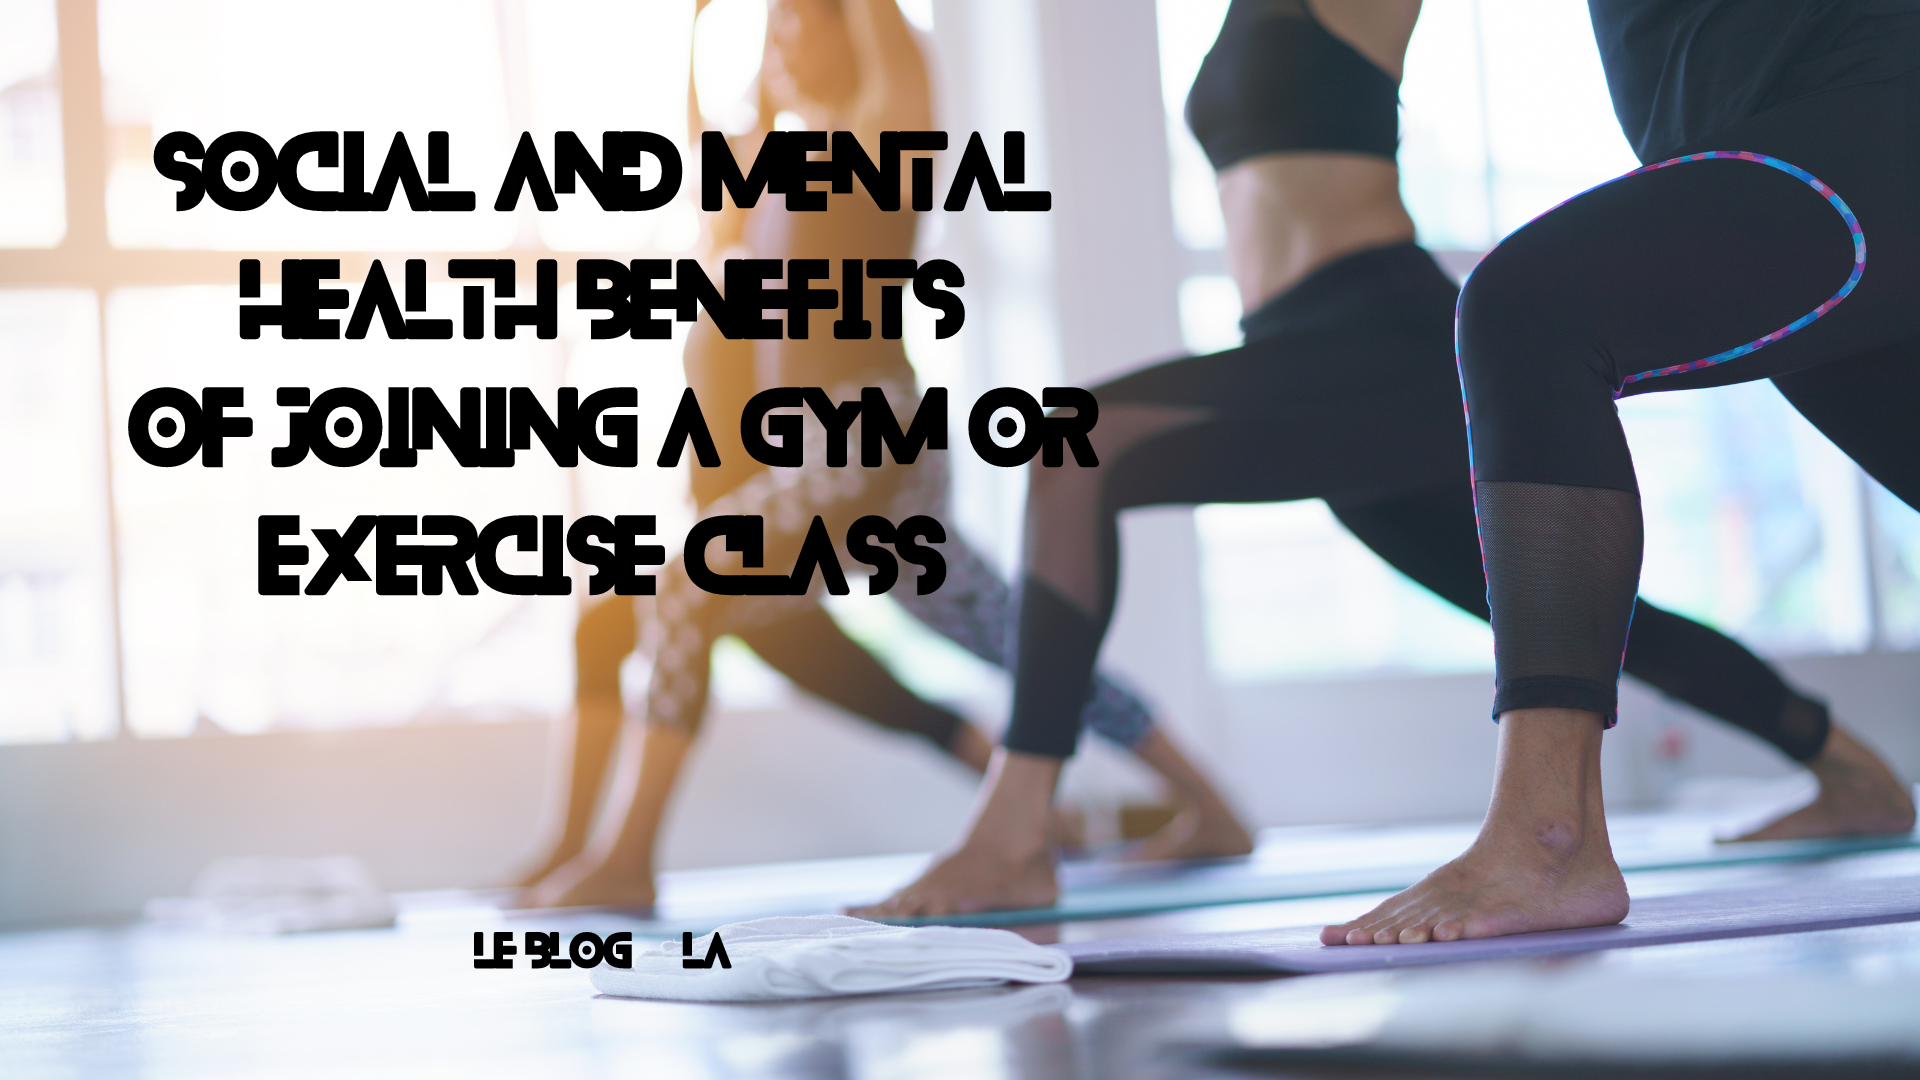 The Science-Backed Social and Mental Health Benefits of Joining a Gym or Exercise Class